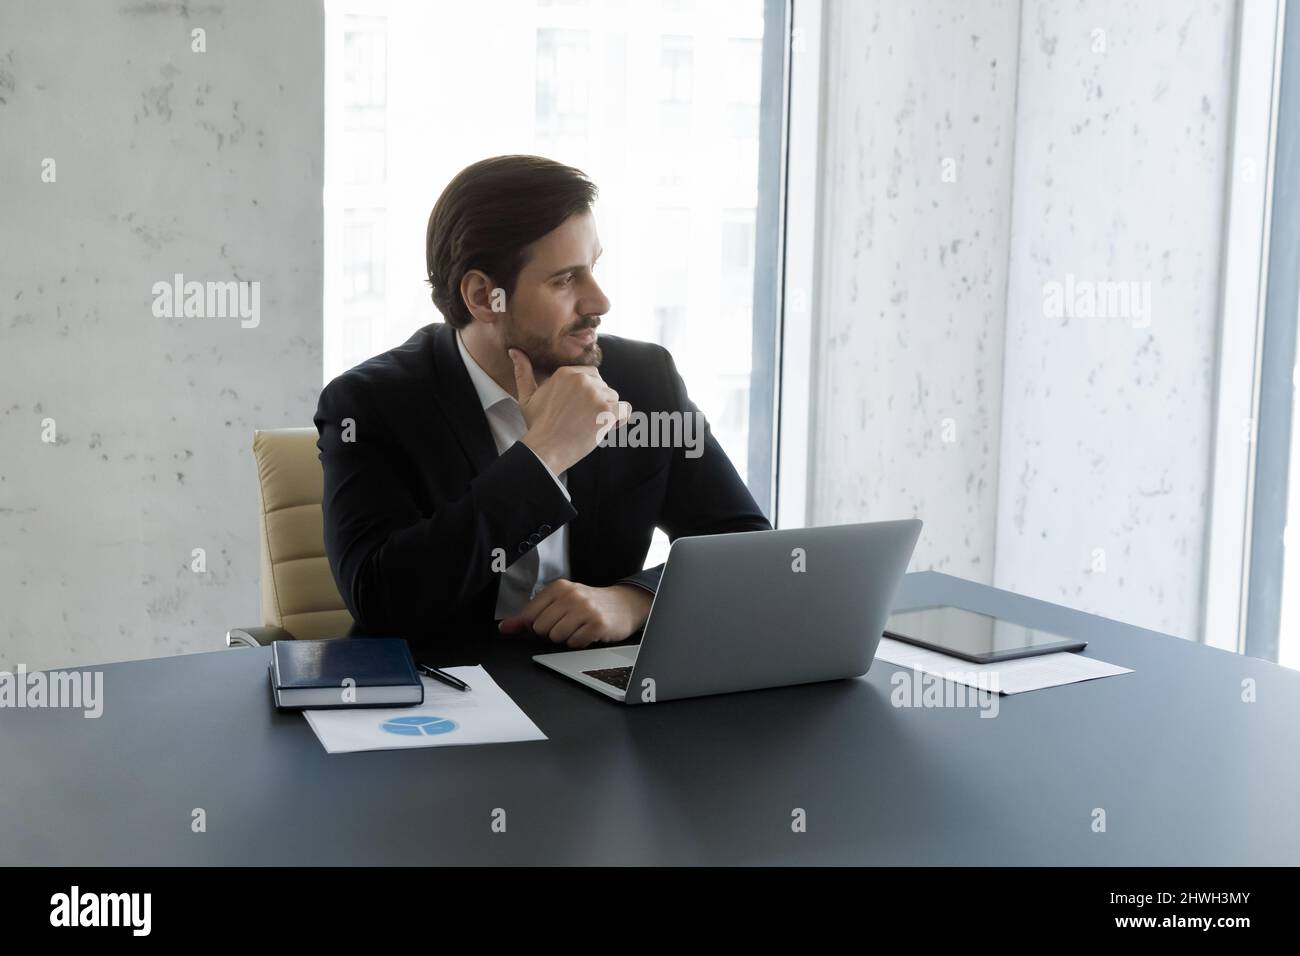 Distracted from computer work pensive man looking in distance. Stock Photo